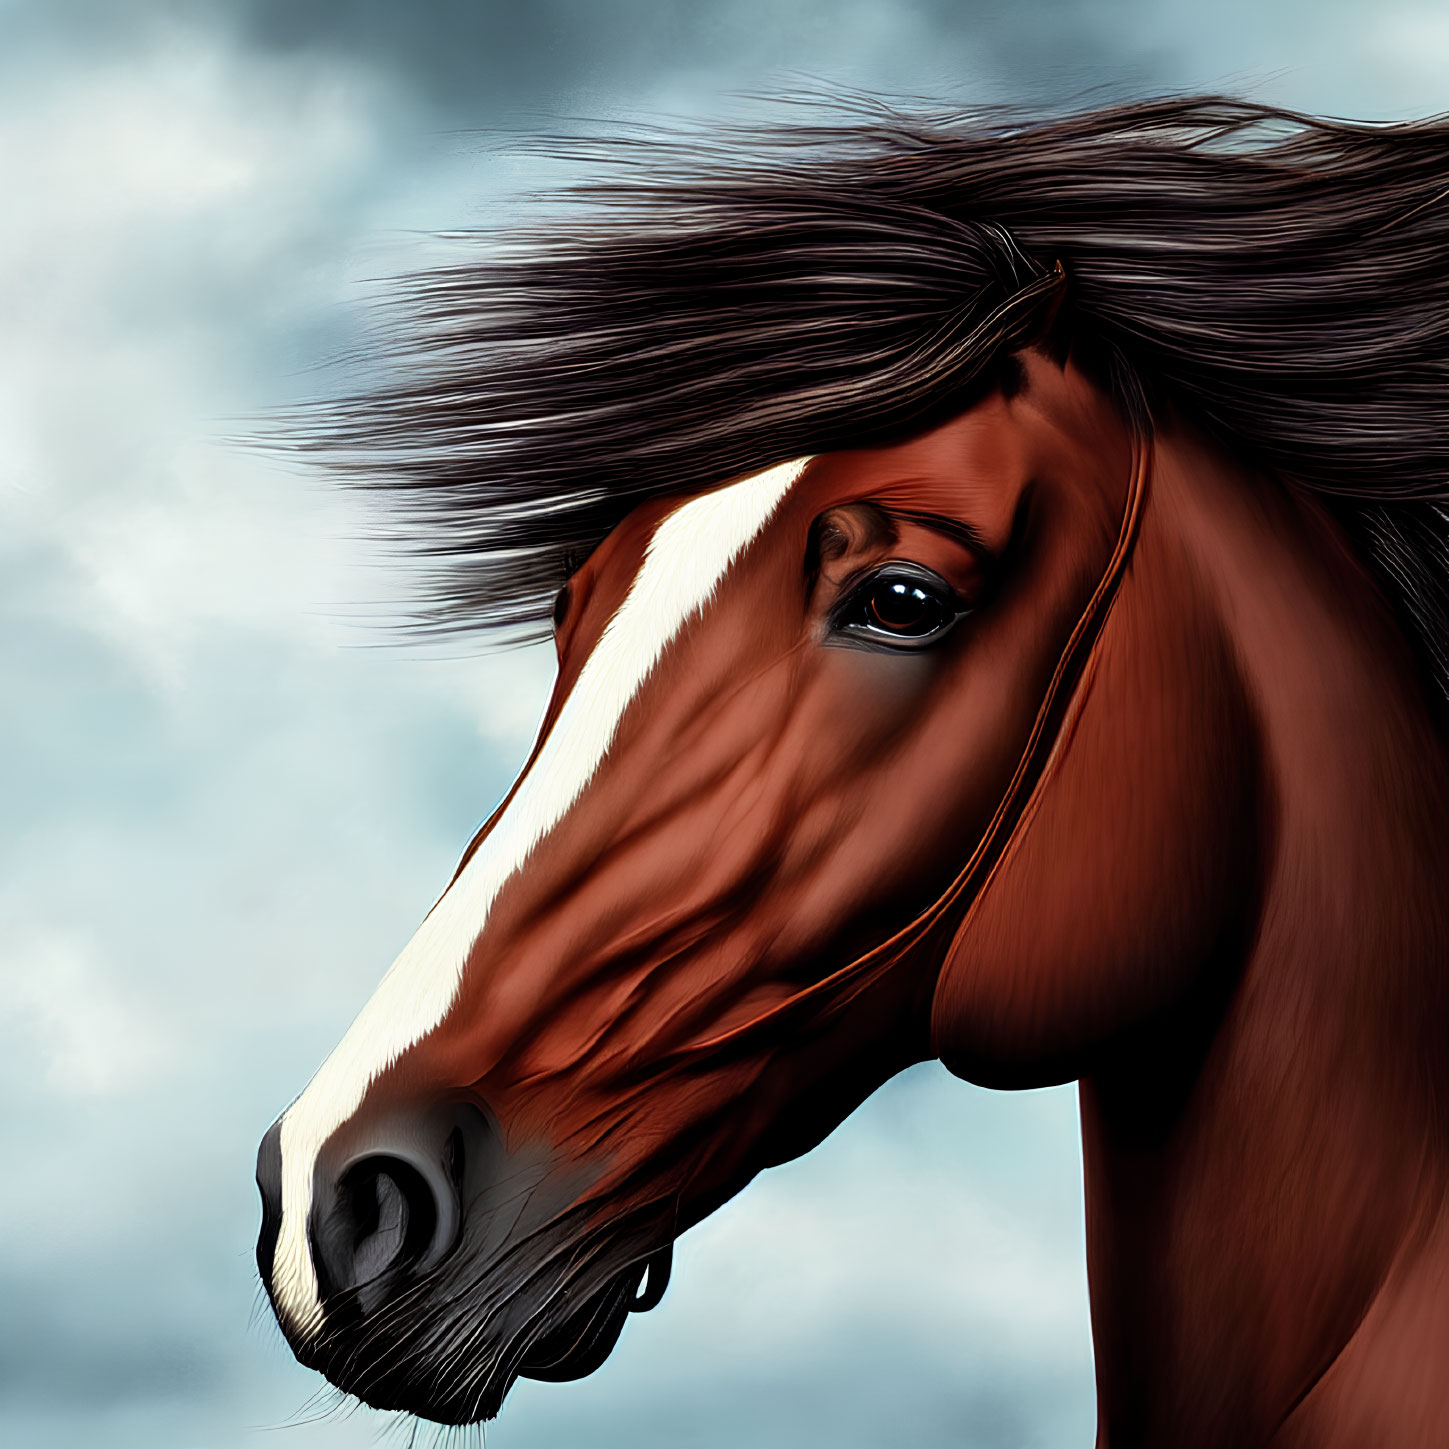 Glossy Chestnut Horse with Dark Mane on Cloudy Sky Background